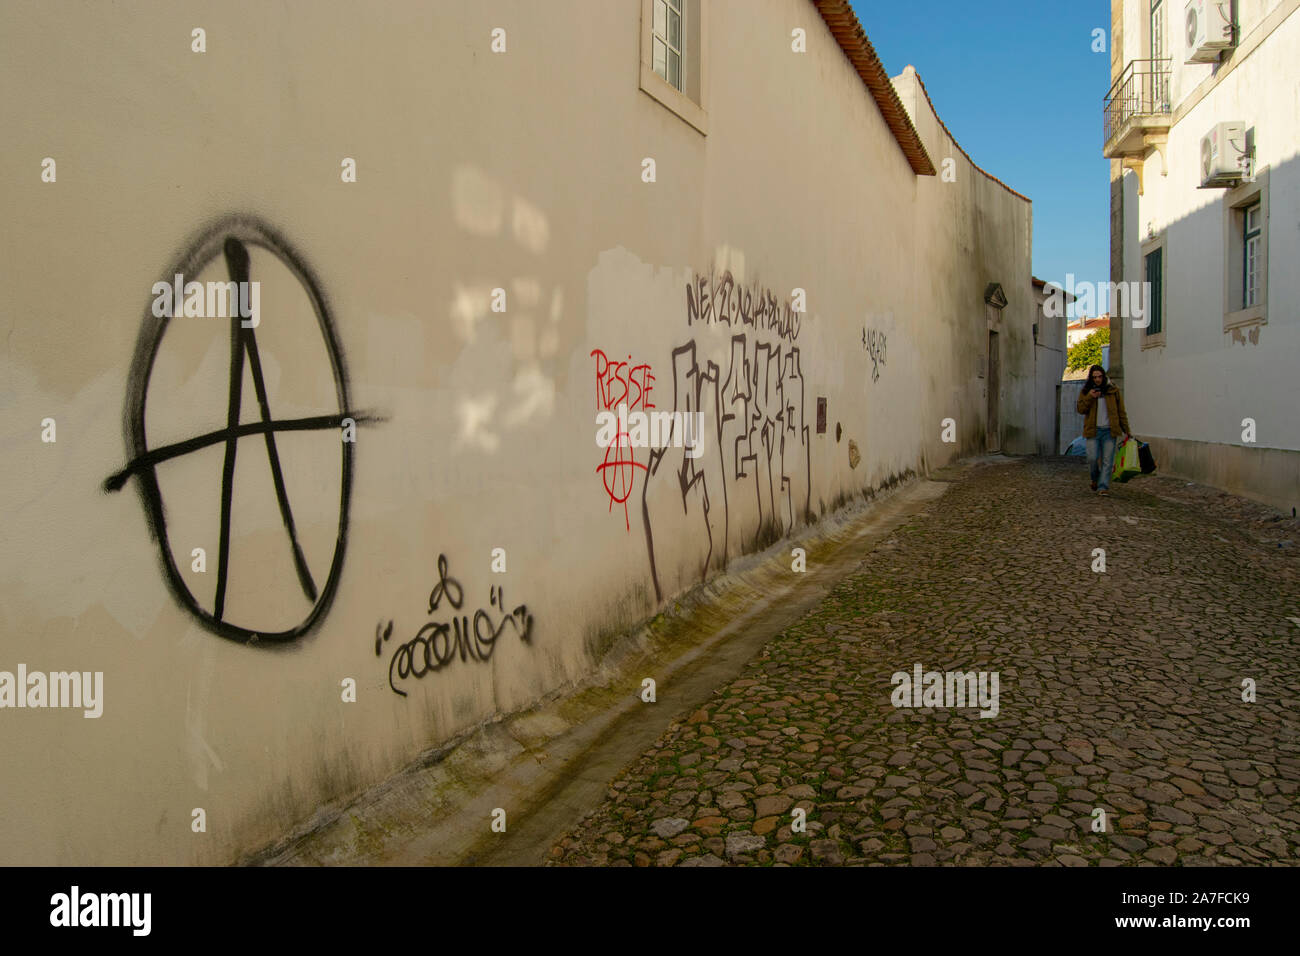 Grafitti on a wall in the old town of Coimbra Portugal Stock Photo